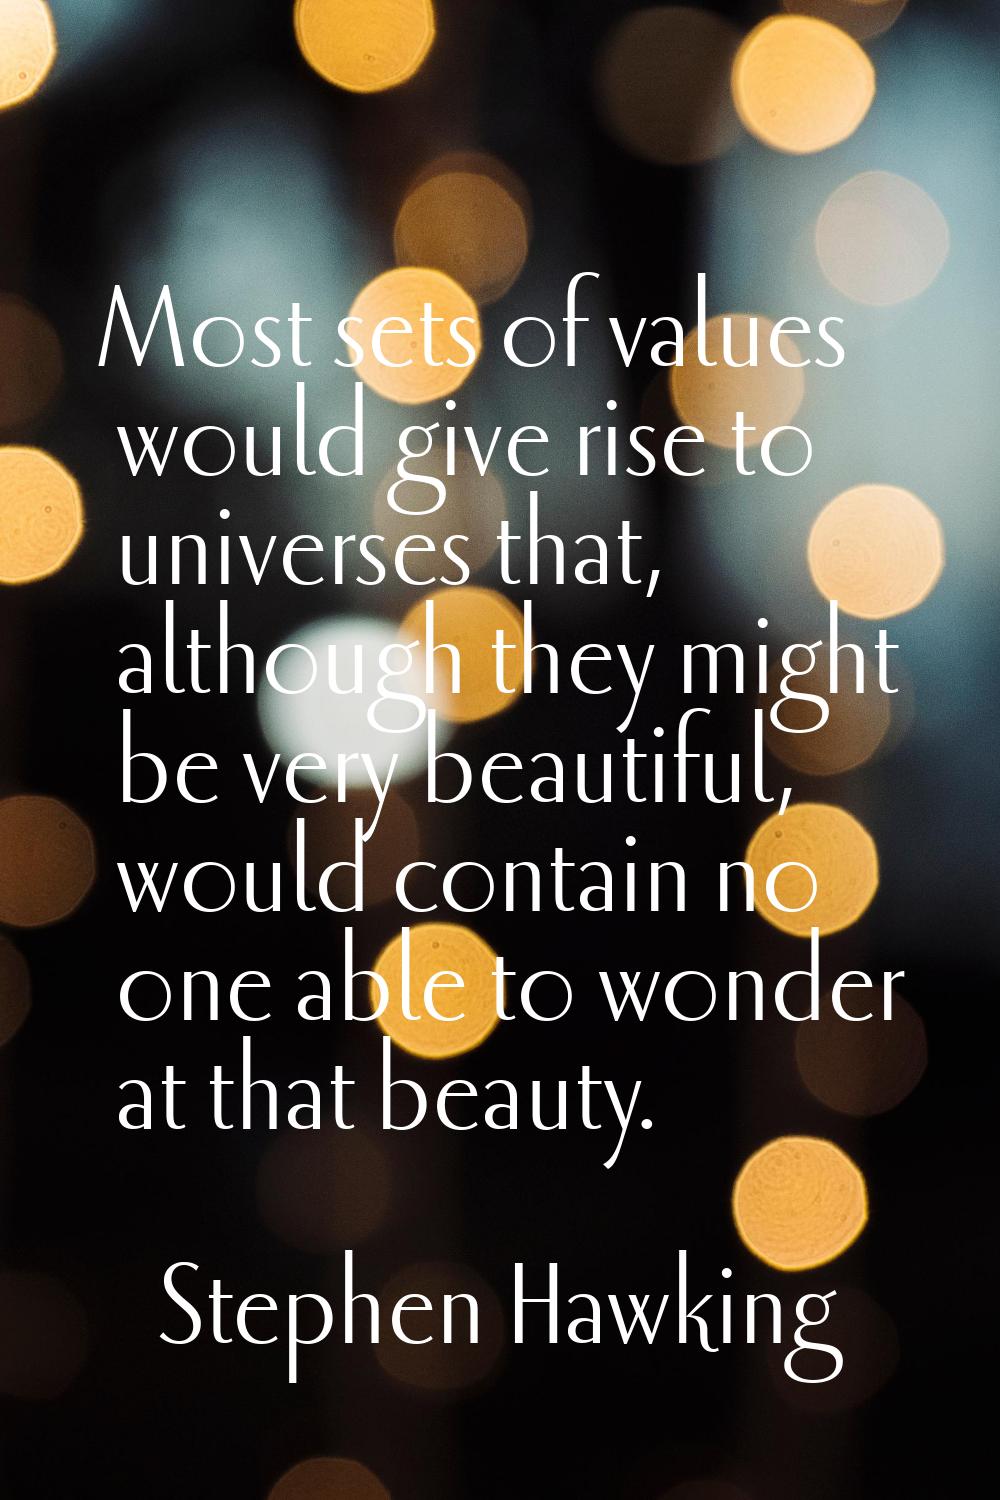 Most sets of values would give rise to universes that, although they might be very beautiful, would